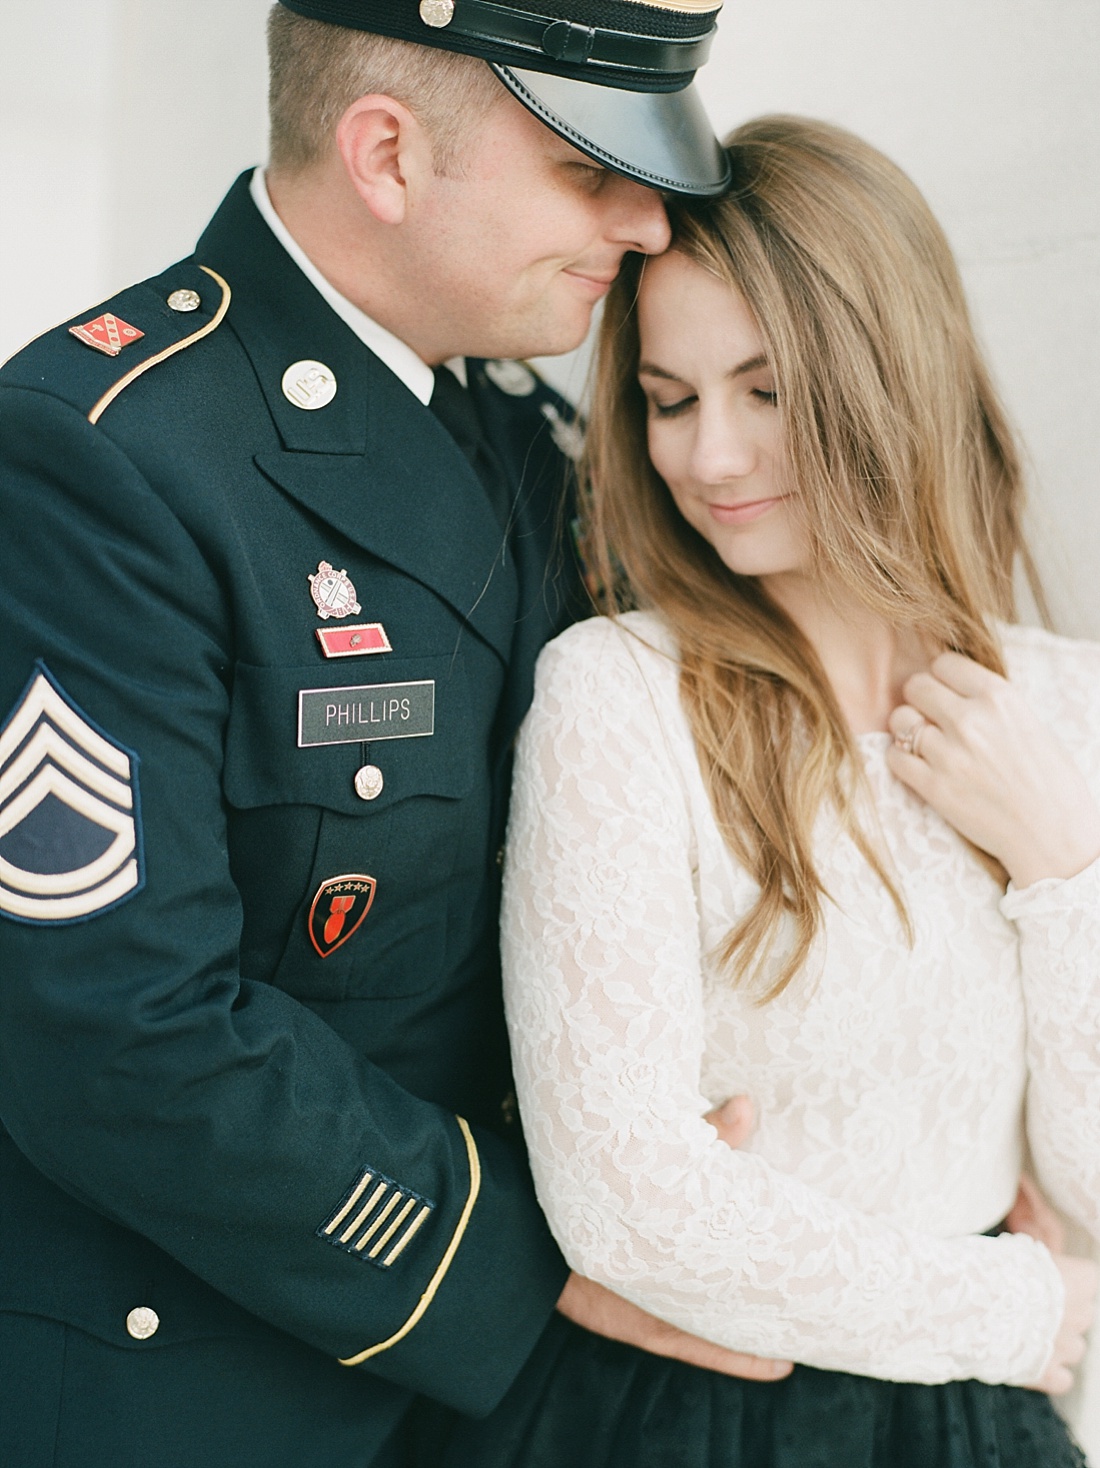 Anniversary portraits at the Lincoln Memorial | Abby Grace Photography